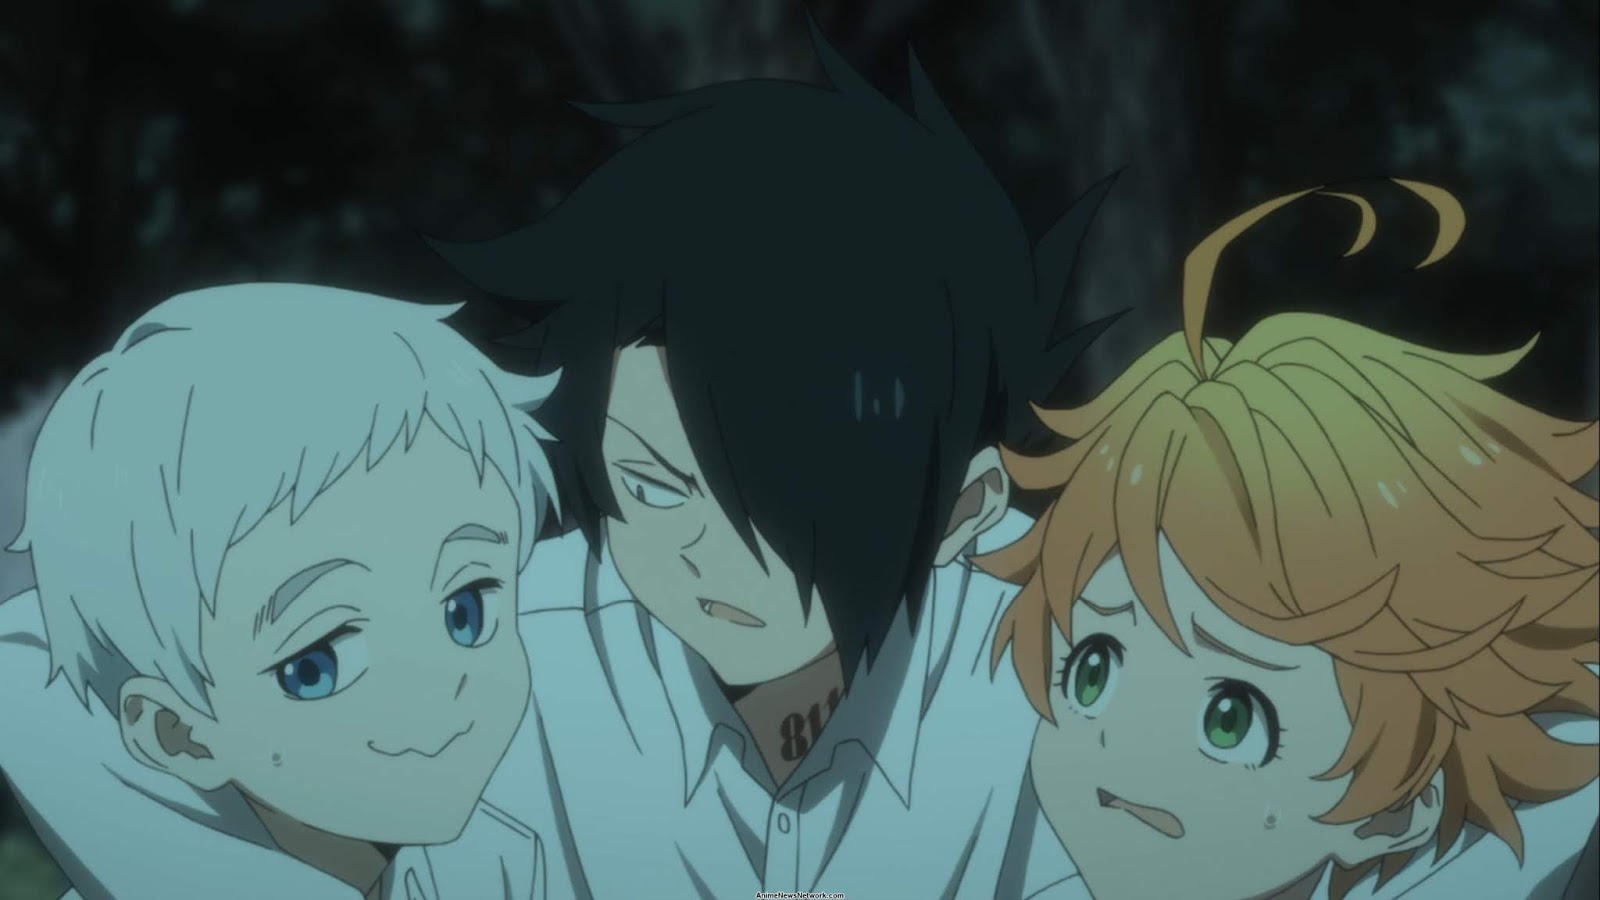 Review: “The Promised Neverland” and the Importance of Friendship